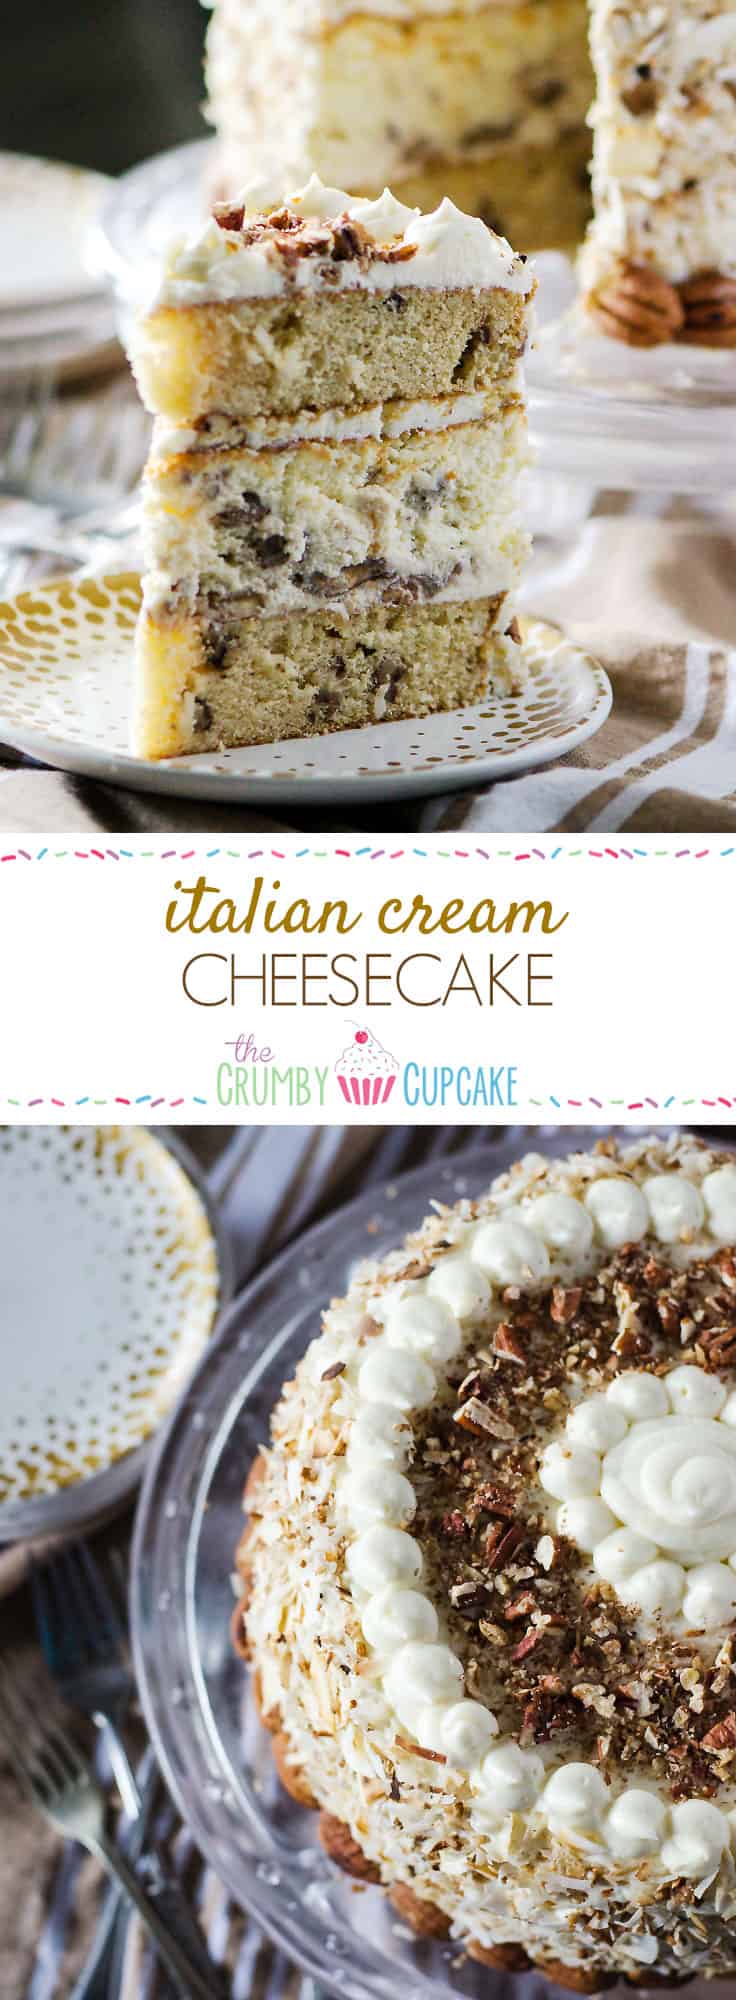 Italian Cream Cheesecake | Two layers of classic Italian Cream Cake and a complementary layer of coconut pecan cheesecake sandwiched in the middle make for one amazing dessert! Così bello!